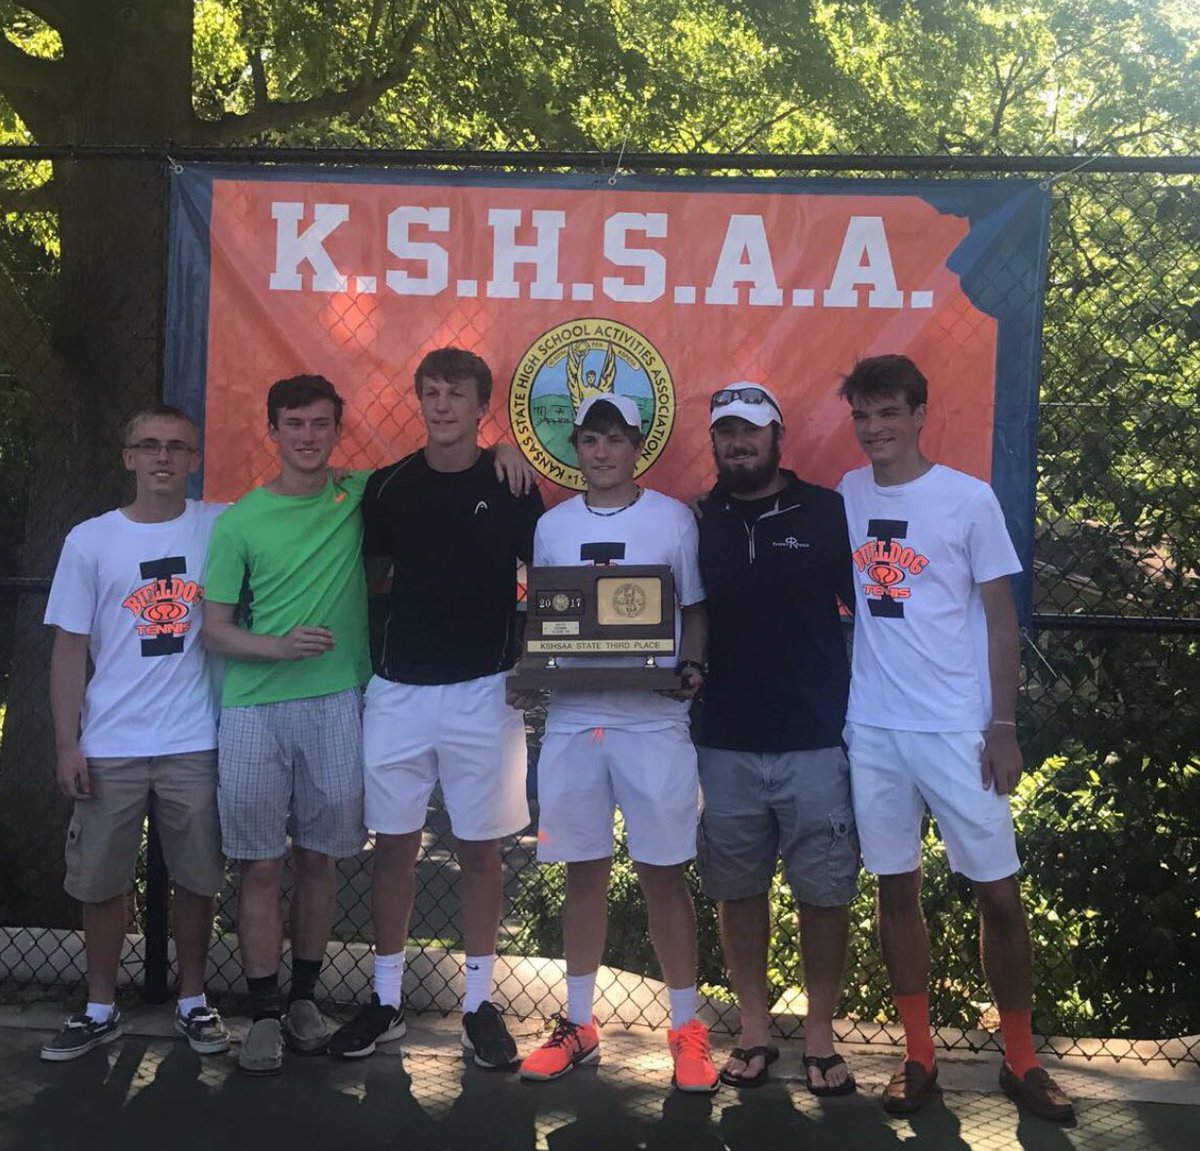 3rd place at State! Couldn't ask for a better group of seniors. 3 plaques in 4 years is impressive. Great job boys! #bulldogtennis #blessed